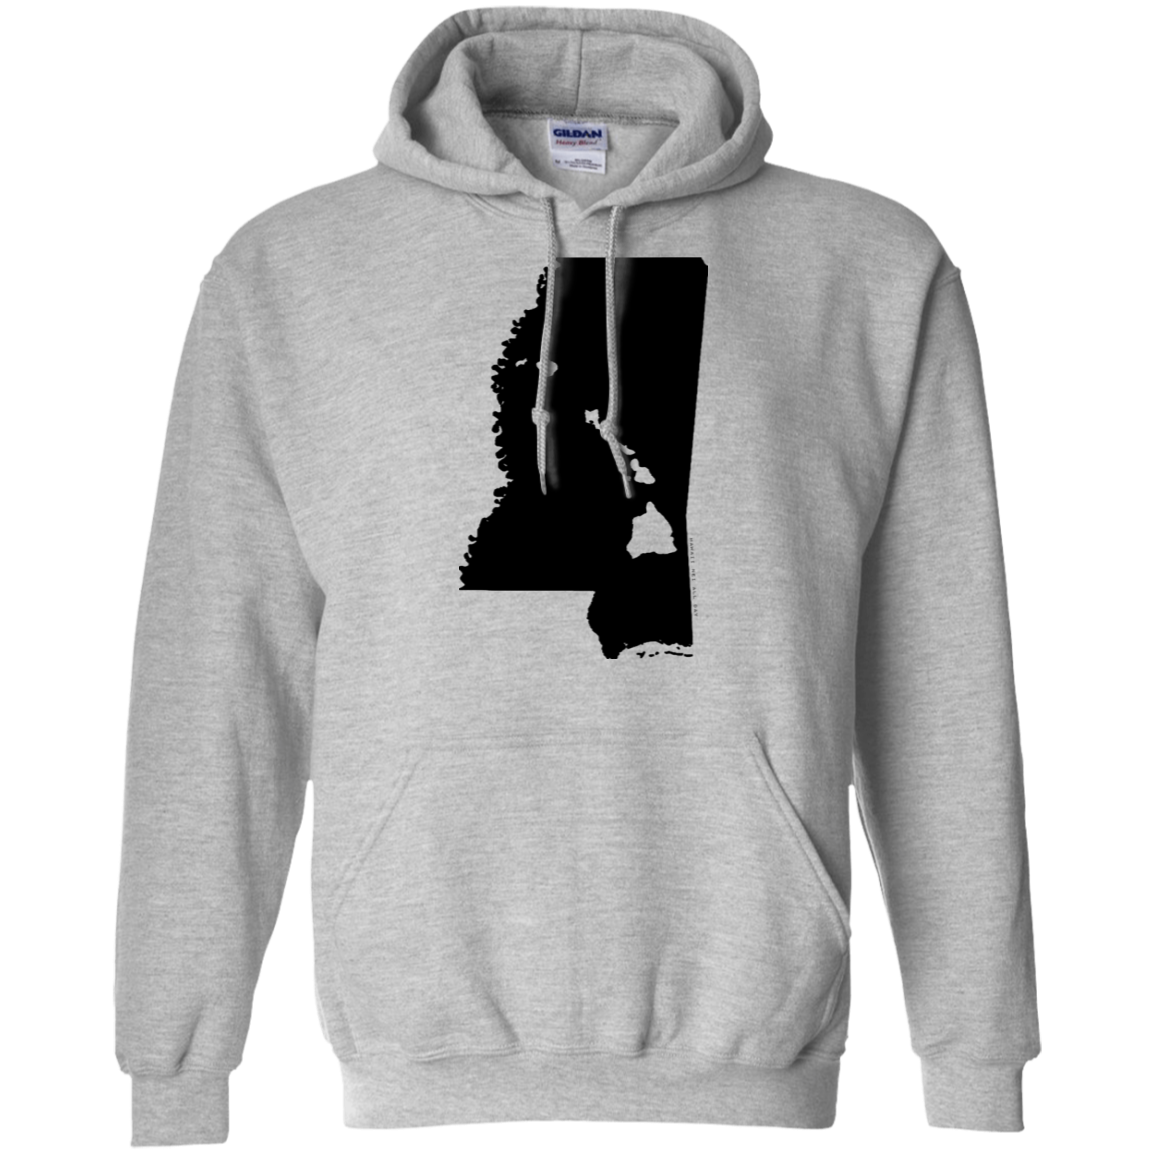 Living in Mississippi with Hawaii Roots Pullover Hoodie 8 oz., Sweatshirts, Hawaii Nei All Day